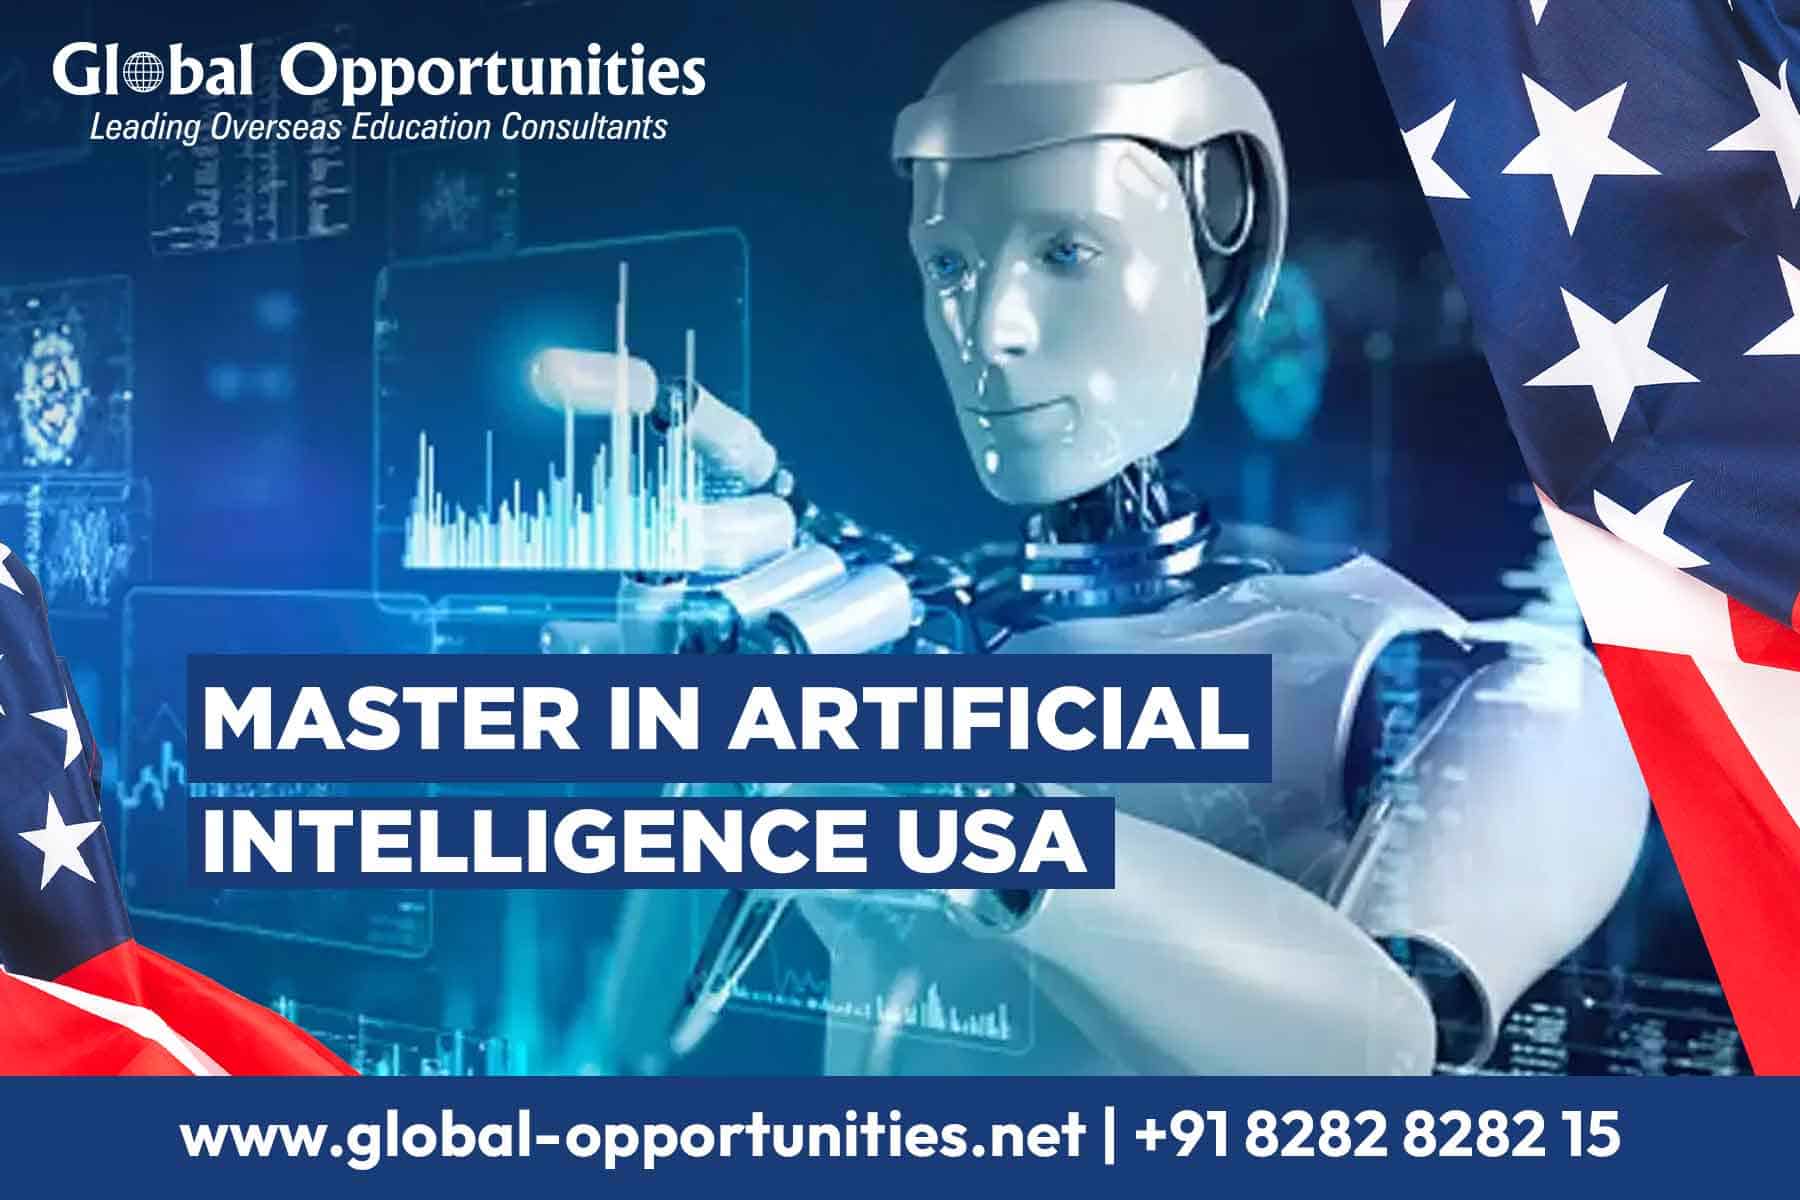 Master in Artificial Intelligence USA